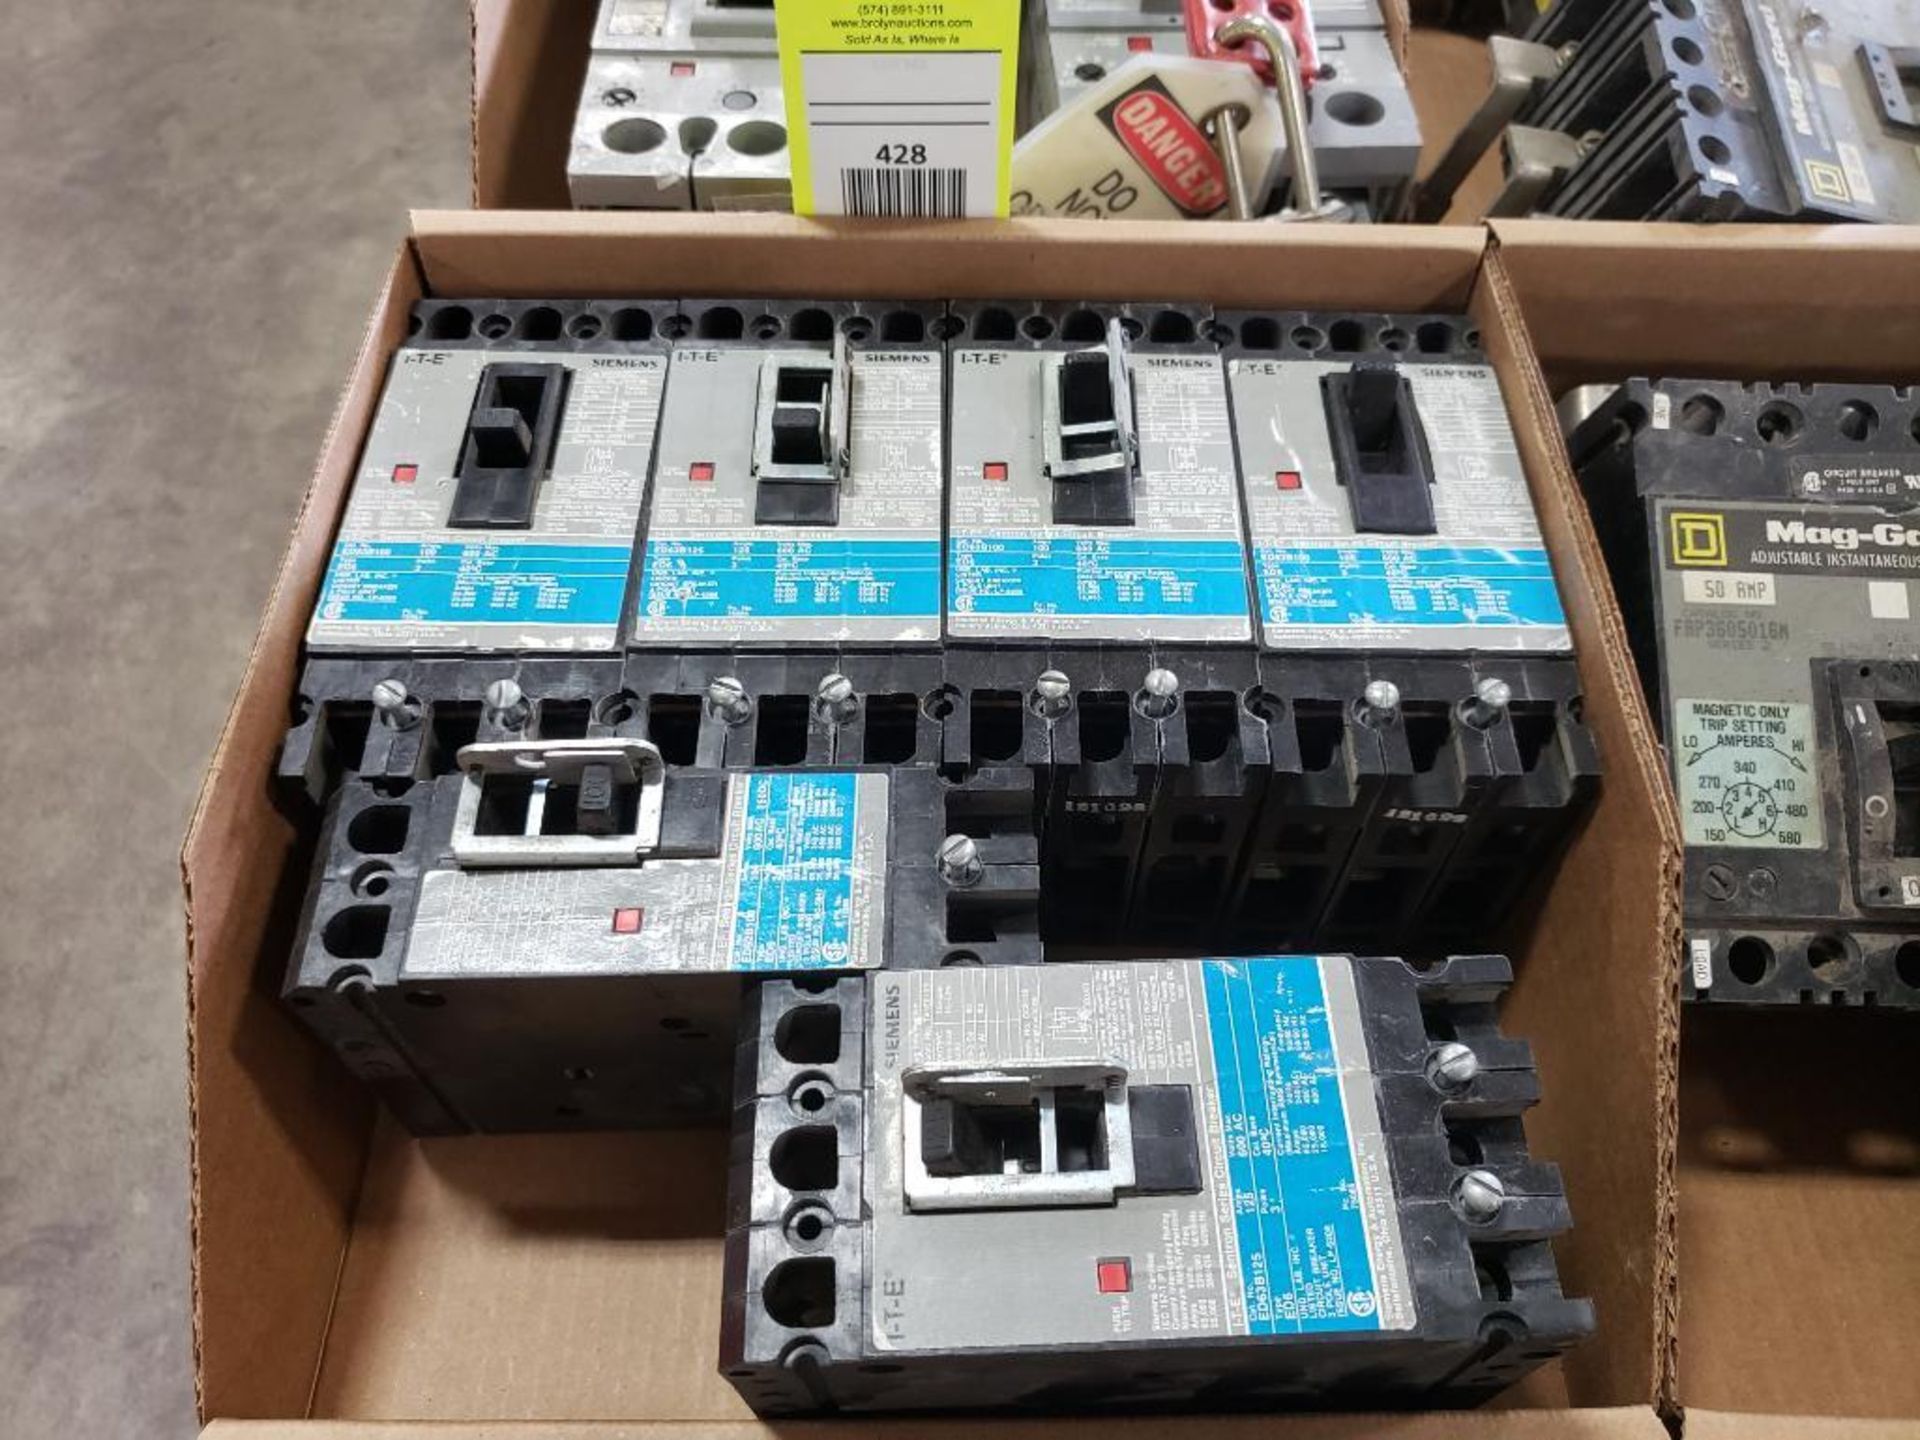 Qty 5 - Assorted ITE Siemens breakers.